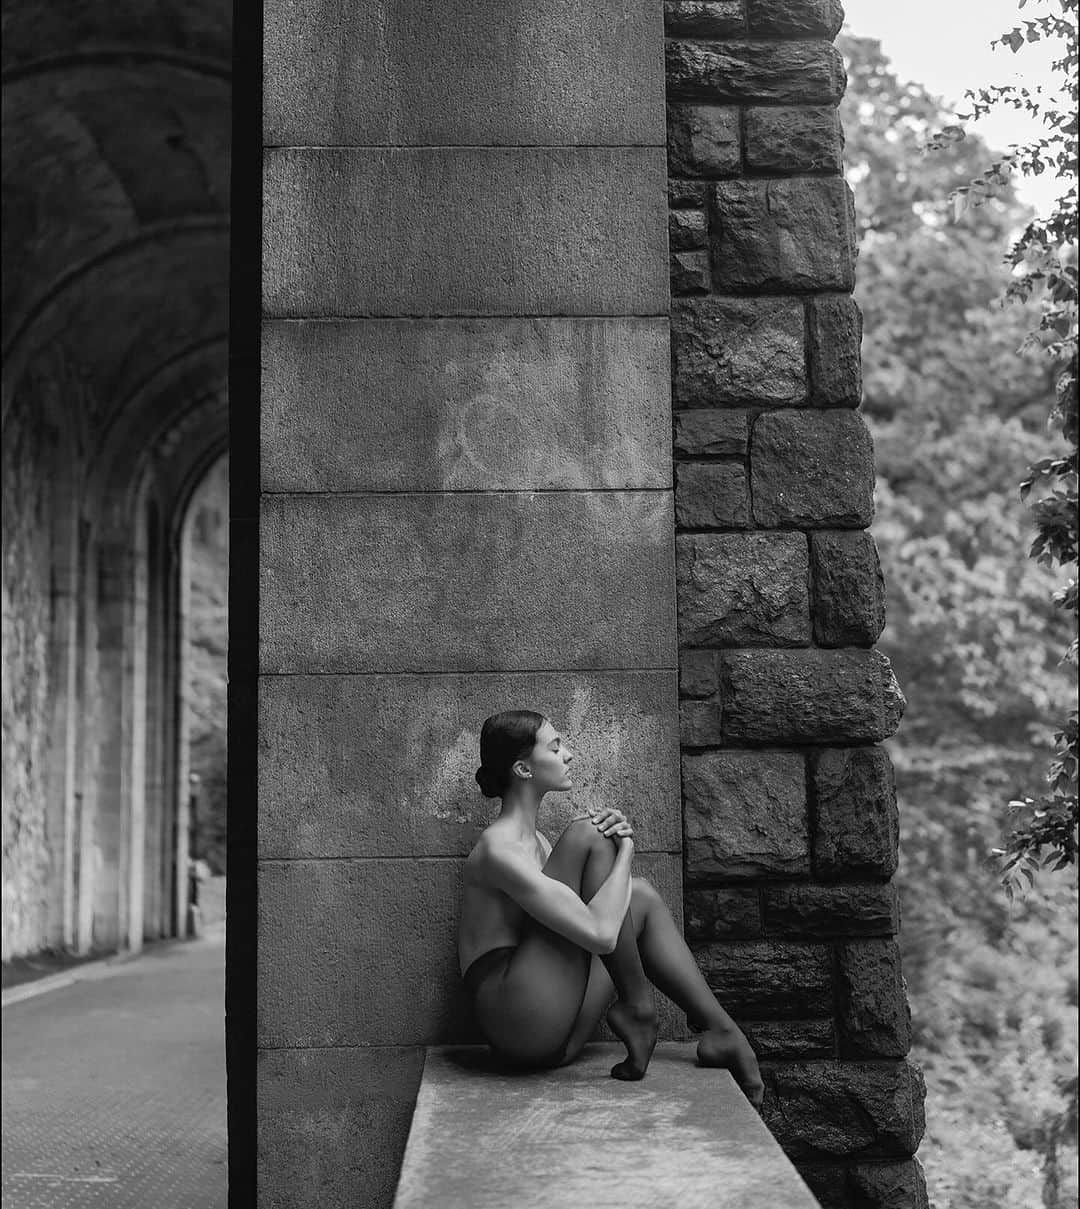 ballerina projectのインスタグラム：「𝐒𝐲𝐝𝐧𝐞𝐲 𝐃𝐨𝐥𝐚𝐧 at Fort Tryon Park in New York City.   @sydney.dolan #sydneydolan #ballerinaproject #forttryonpark #newyorkcity #ballerina #ballet @wolford #wolford #hosiery #tights   Ballerina Project 𝗹𝗮𝗿𝗴𝗲 𝗳𝗼𝗿𝗺𝗮𝘁 𝗹𝗶𝗺𝗶𝘁𝗲𝗱 𝗲𝗱𝘁𝗶𝗼𝗻 𝗽𝗿𝗶𝗻𝘁𝘀 and 𝗜𝗻𝘀𝘁𝗮𝘅 𝗰𝗼𝗹𝗹𝗲𝗰𝘁𝗶𝗼𝗻𝘀 on sale in our Etsy store. Link is located in our bio.  𝙎𝙪𝙗𝙨𝙘𝙧𝙞𝙗𝙚 to the 𝐁𝐚𝐥𝐥𝐞𝐫𝐢𝐧𝐚 𝐏𝐫𝐨𝐣𝐞𝐜𝐭 on Instagram to have access to exclusive and never seen before content. 🩰」